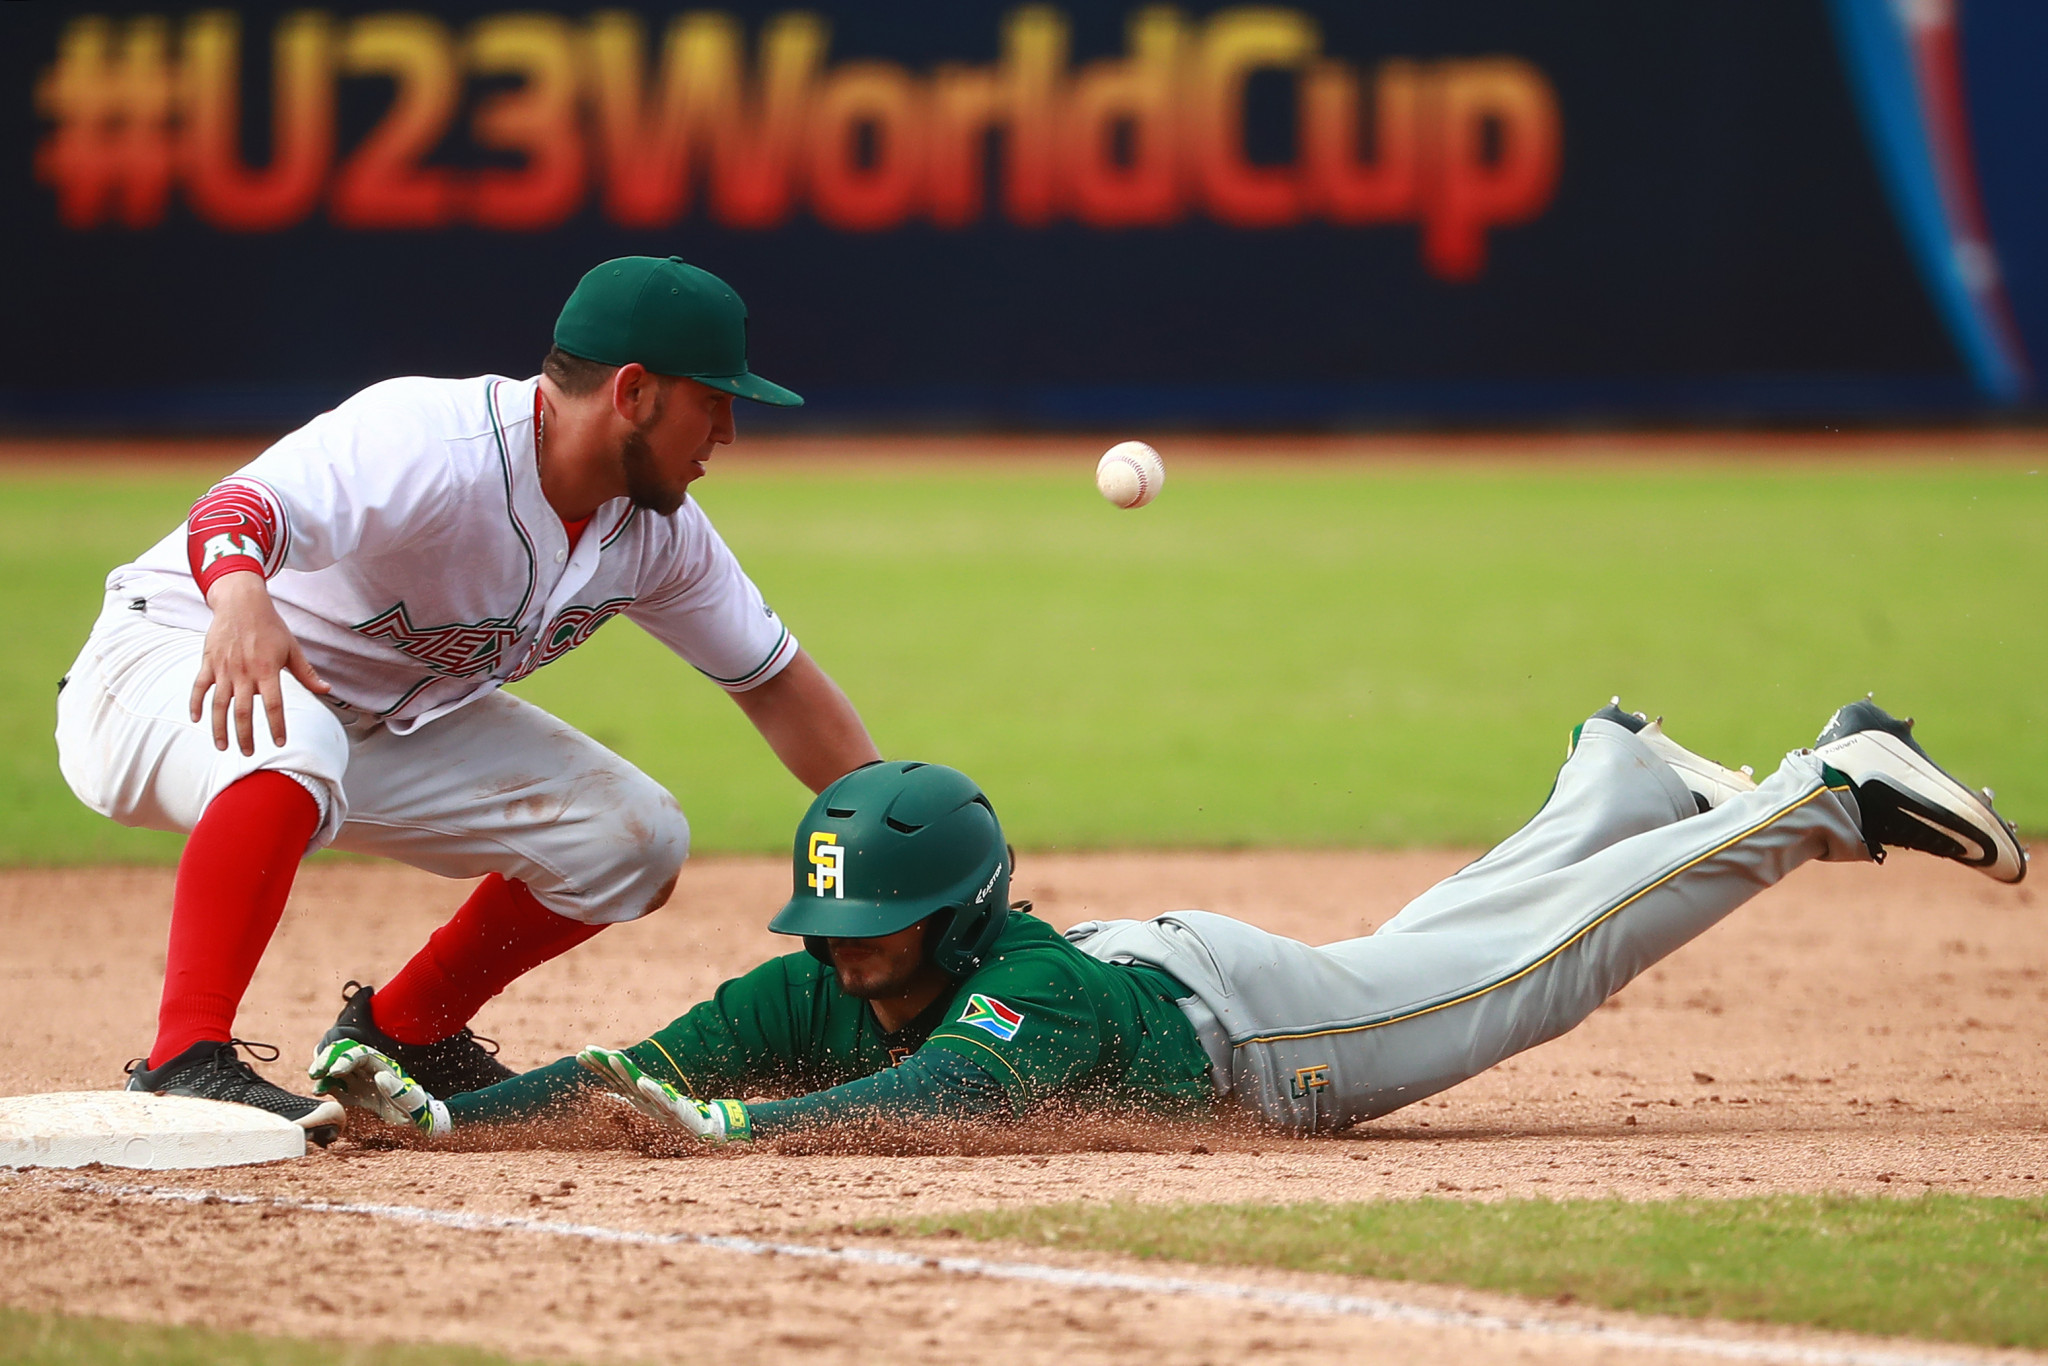 Barranquilla has held many baseball and softball events, including the Under-23 Baseball World Cup in 2018 ©Getty Images